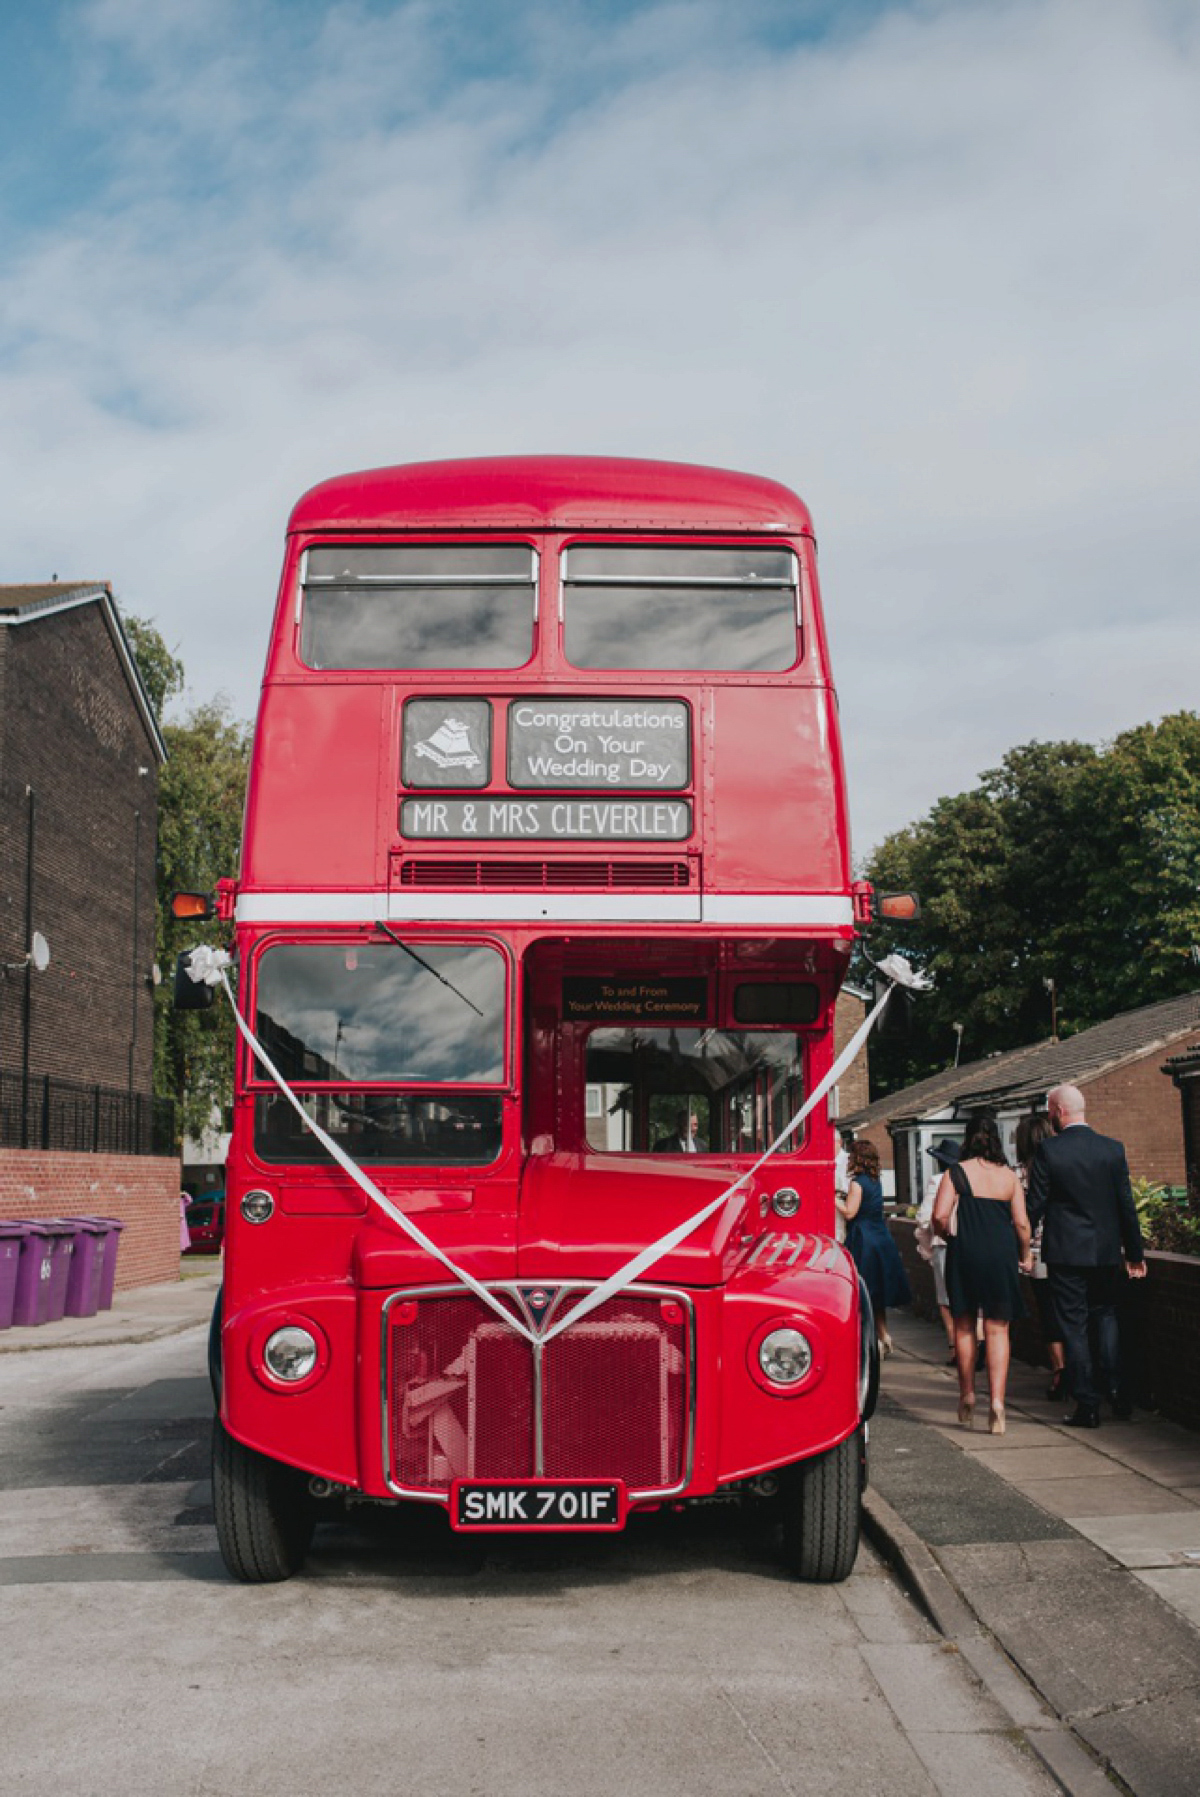 A Juliet cap veil and red lipstick for a quirky vintage wedding in Liverpool. Photography by Becky Ryan.